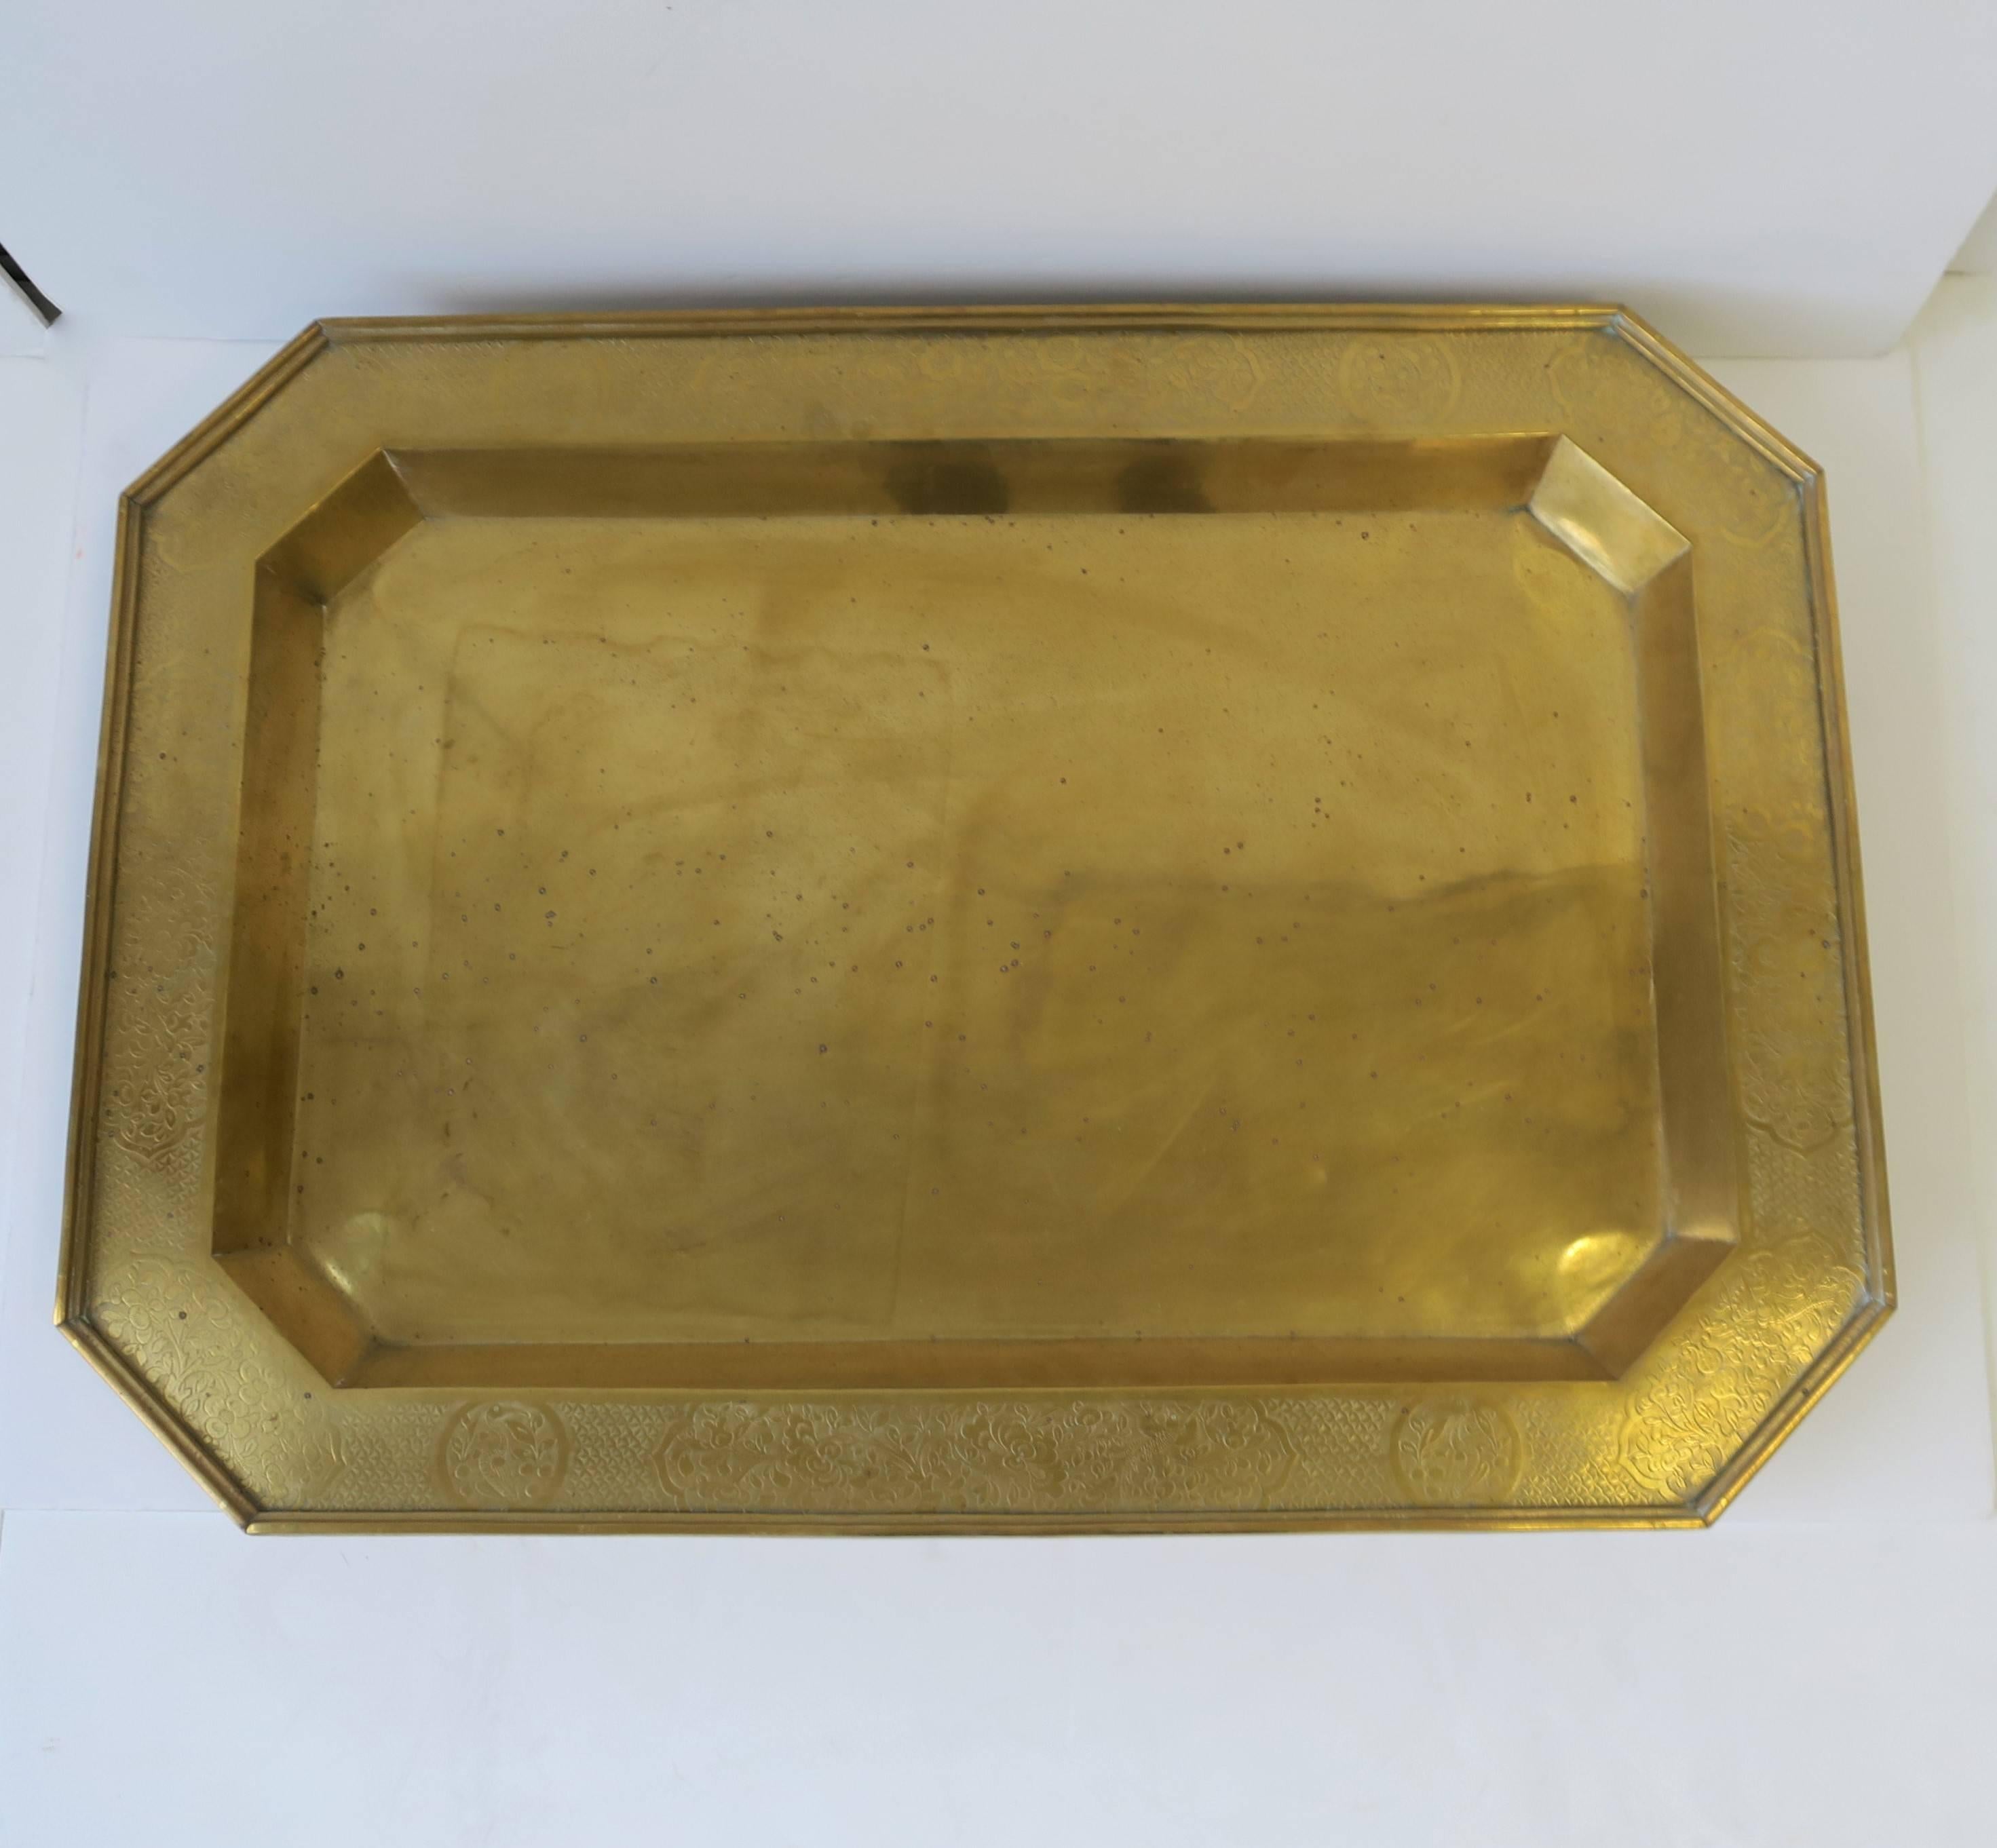 A beautiful, large, and substantial vintage brass octagonal serving tray. Tray has decorated edge featuring birds and botanicals.

Tray measures: 25.75 in. W x 18.25 in. D x 3 in. H

